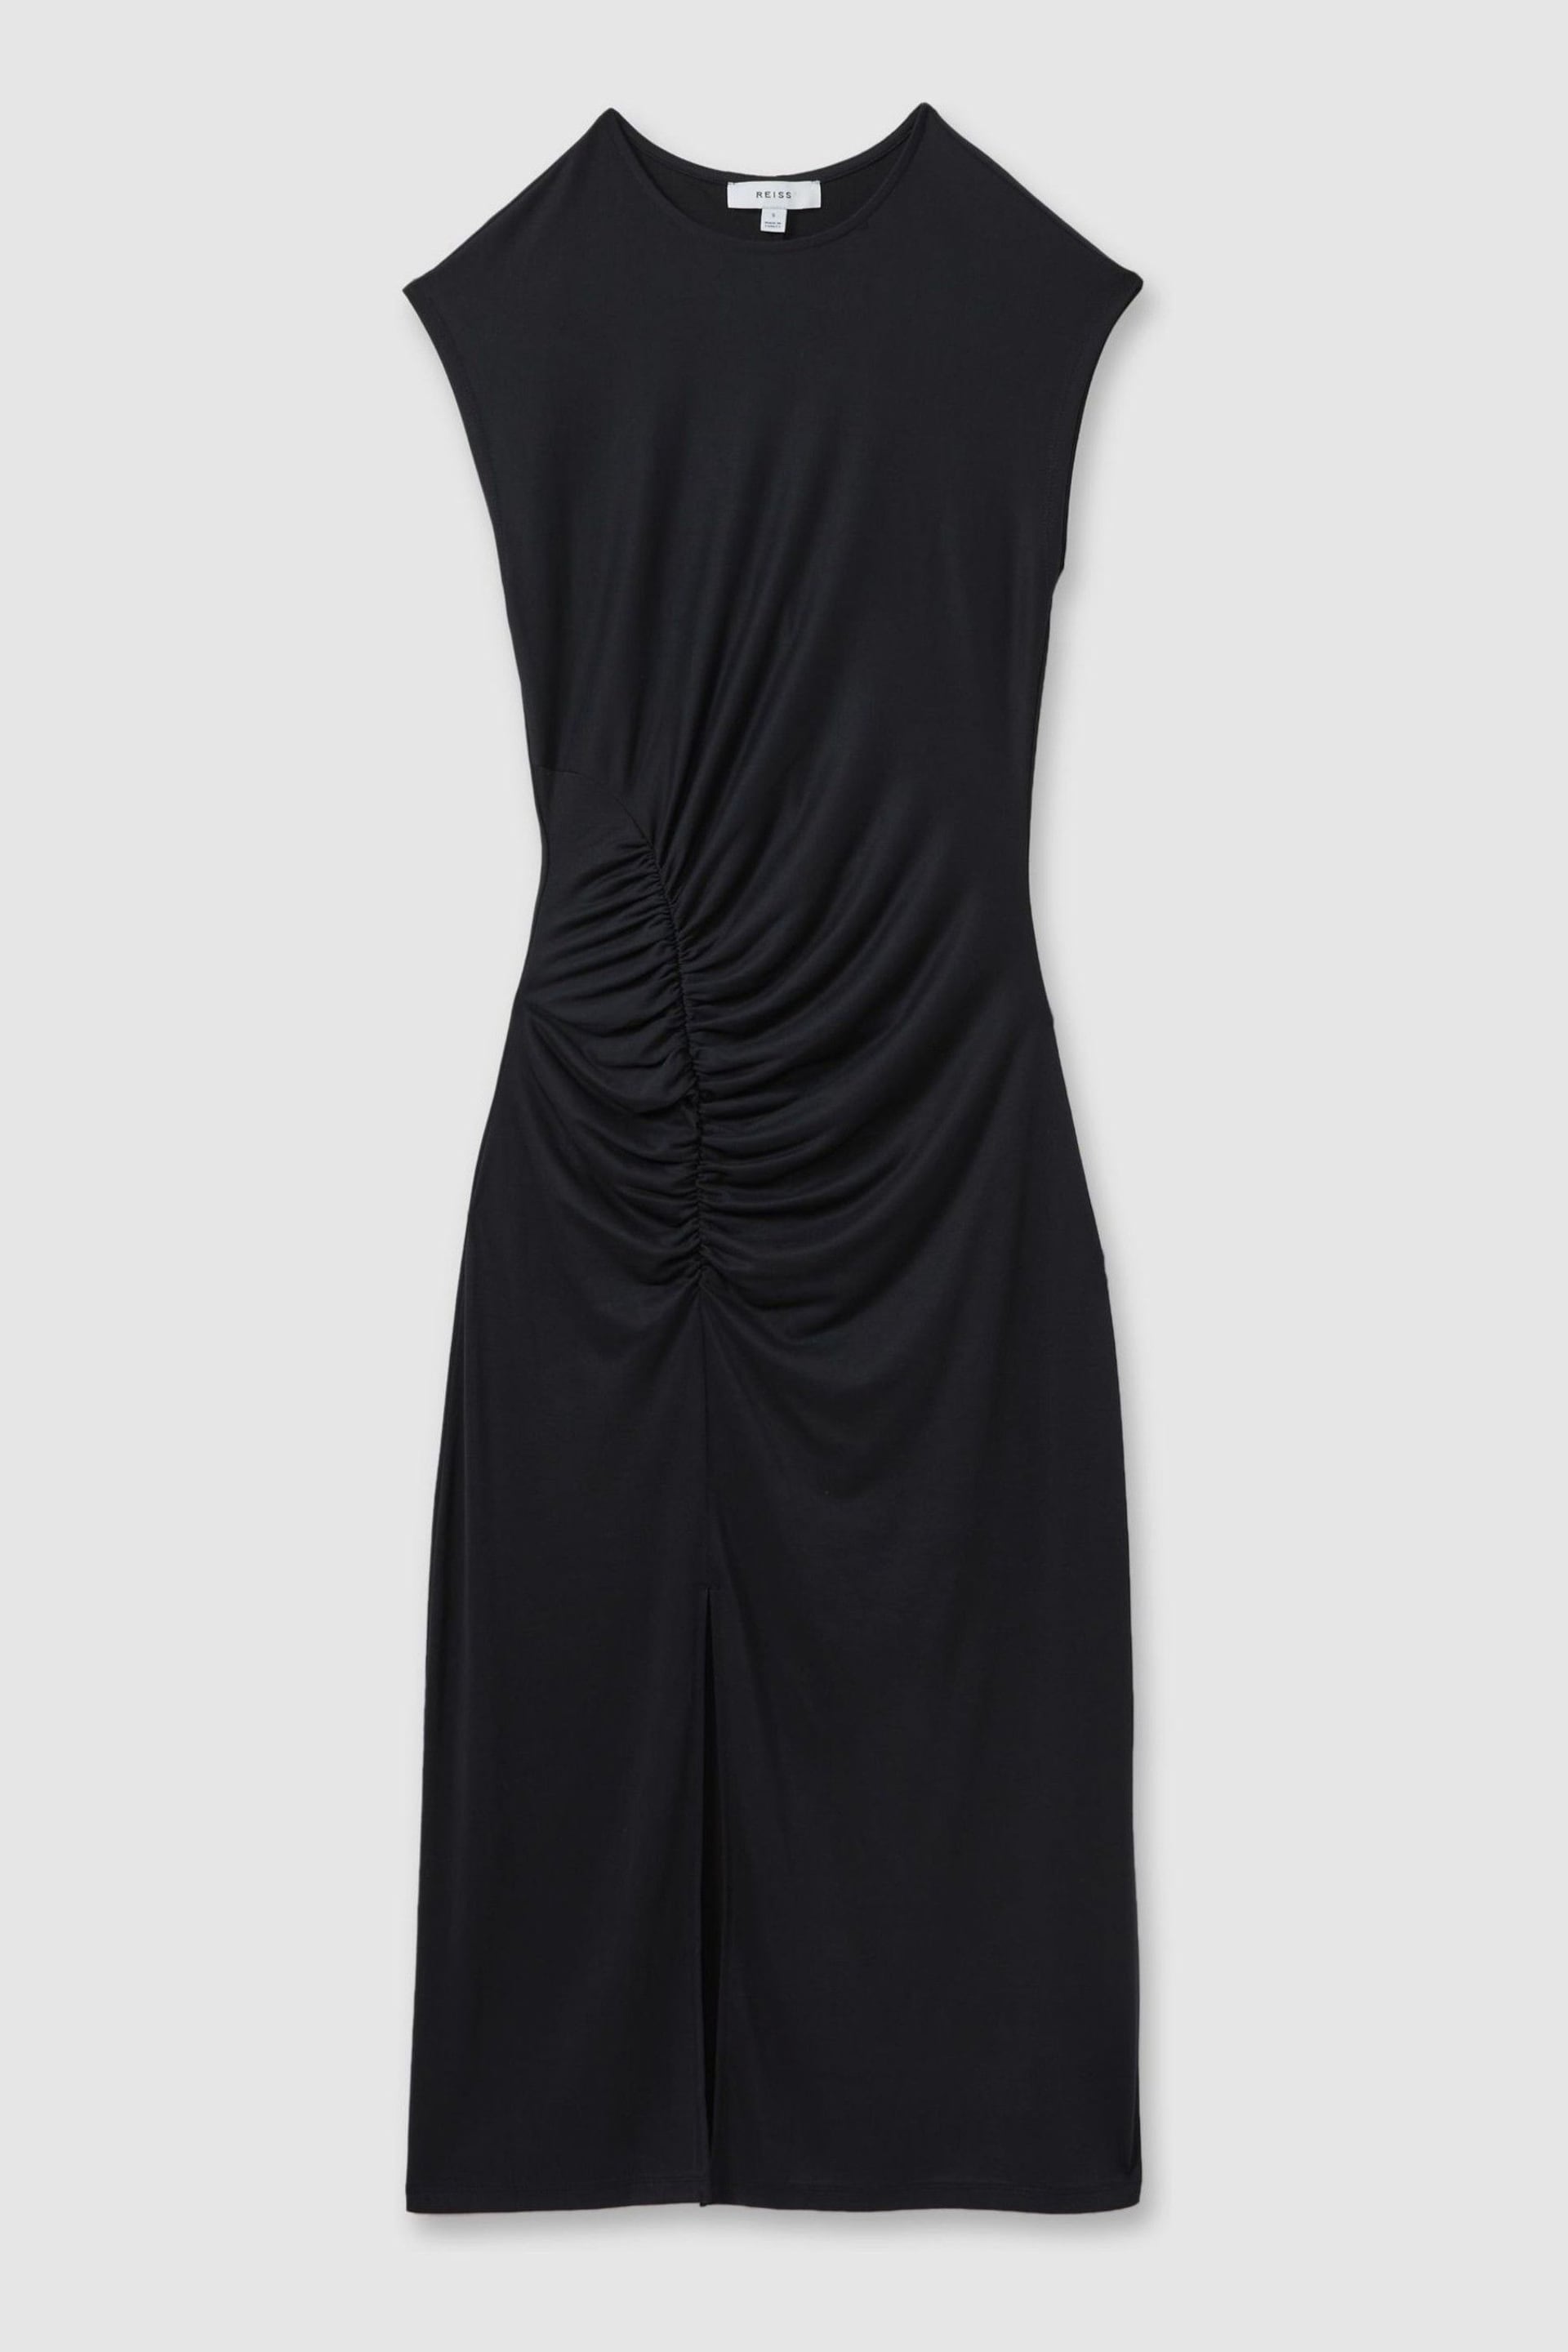 Reiss Charcoal Lenara Ruche Front Capped Sleeve Jersey Midi Dress - Image 2 of 5